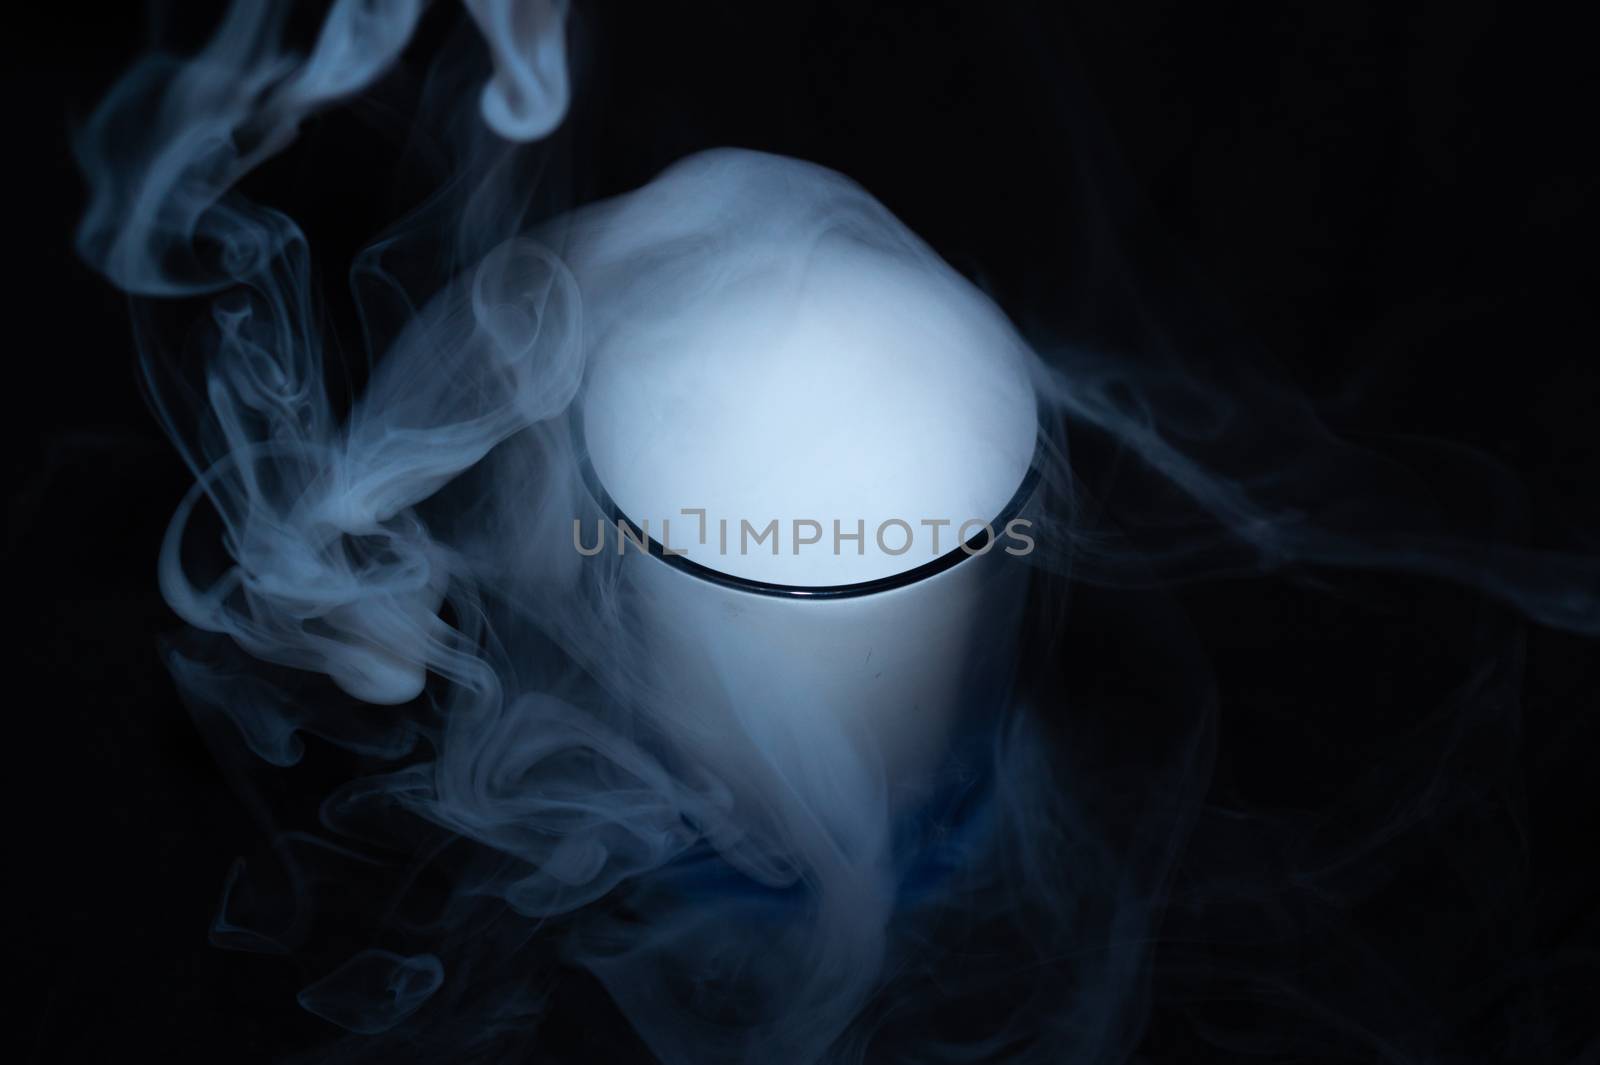 White smoke on black fabric background in glass. Smoke spreads over the background. Vaping culture, life without cigarettes. Conceptual image.